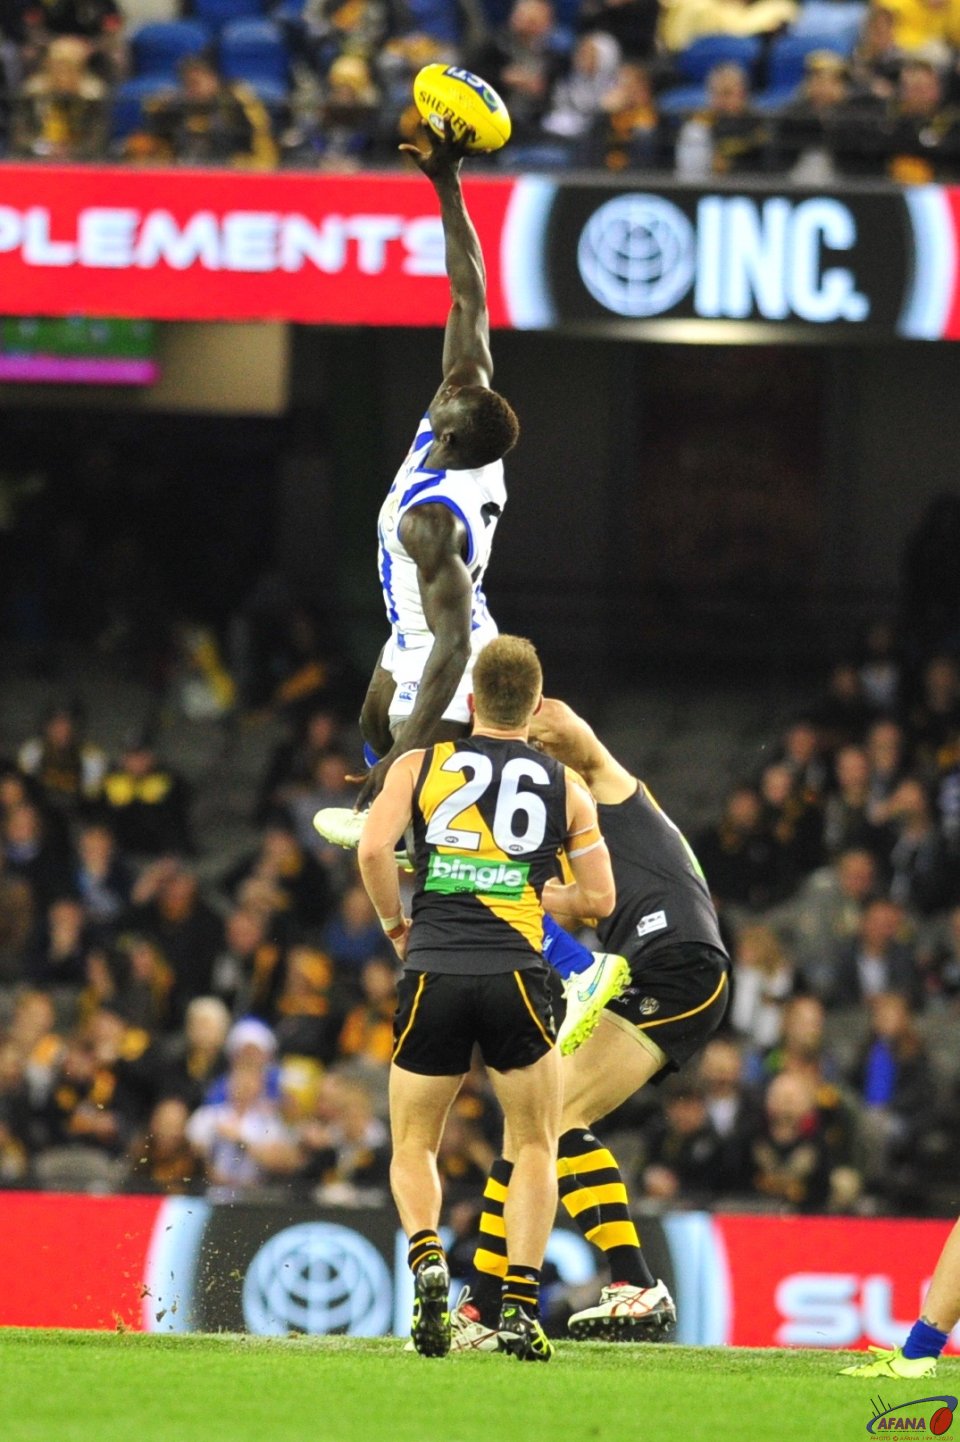 Majak gets some air